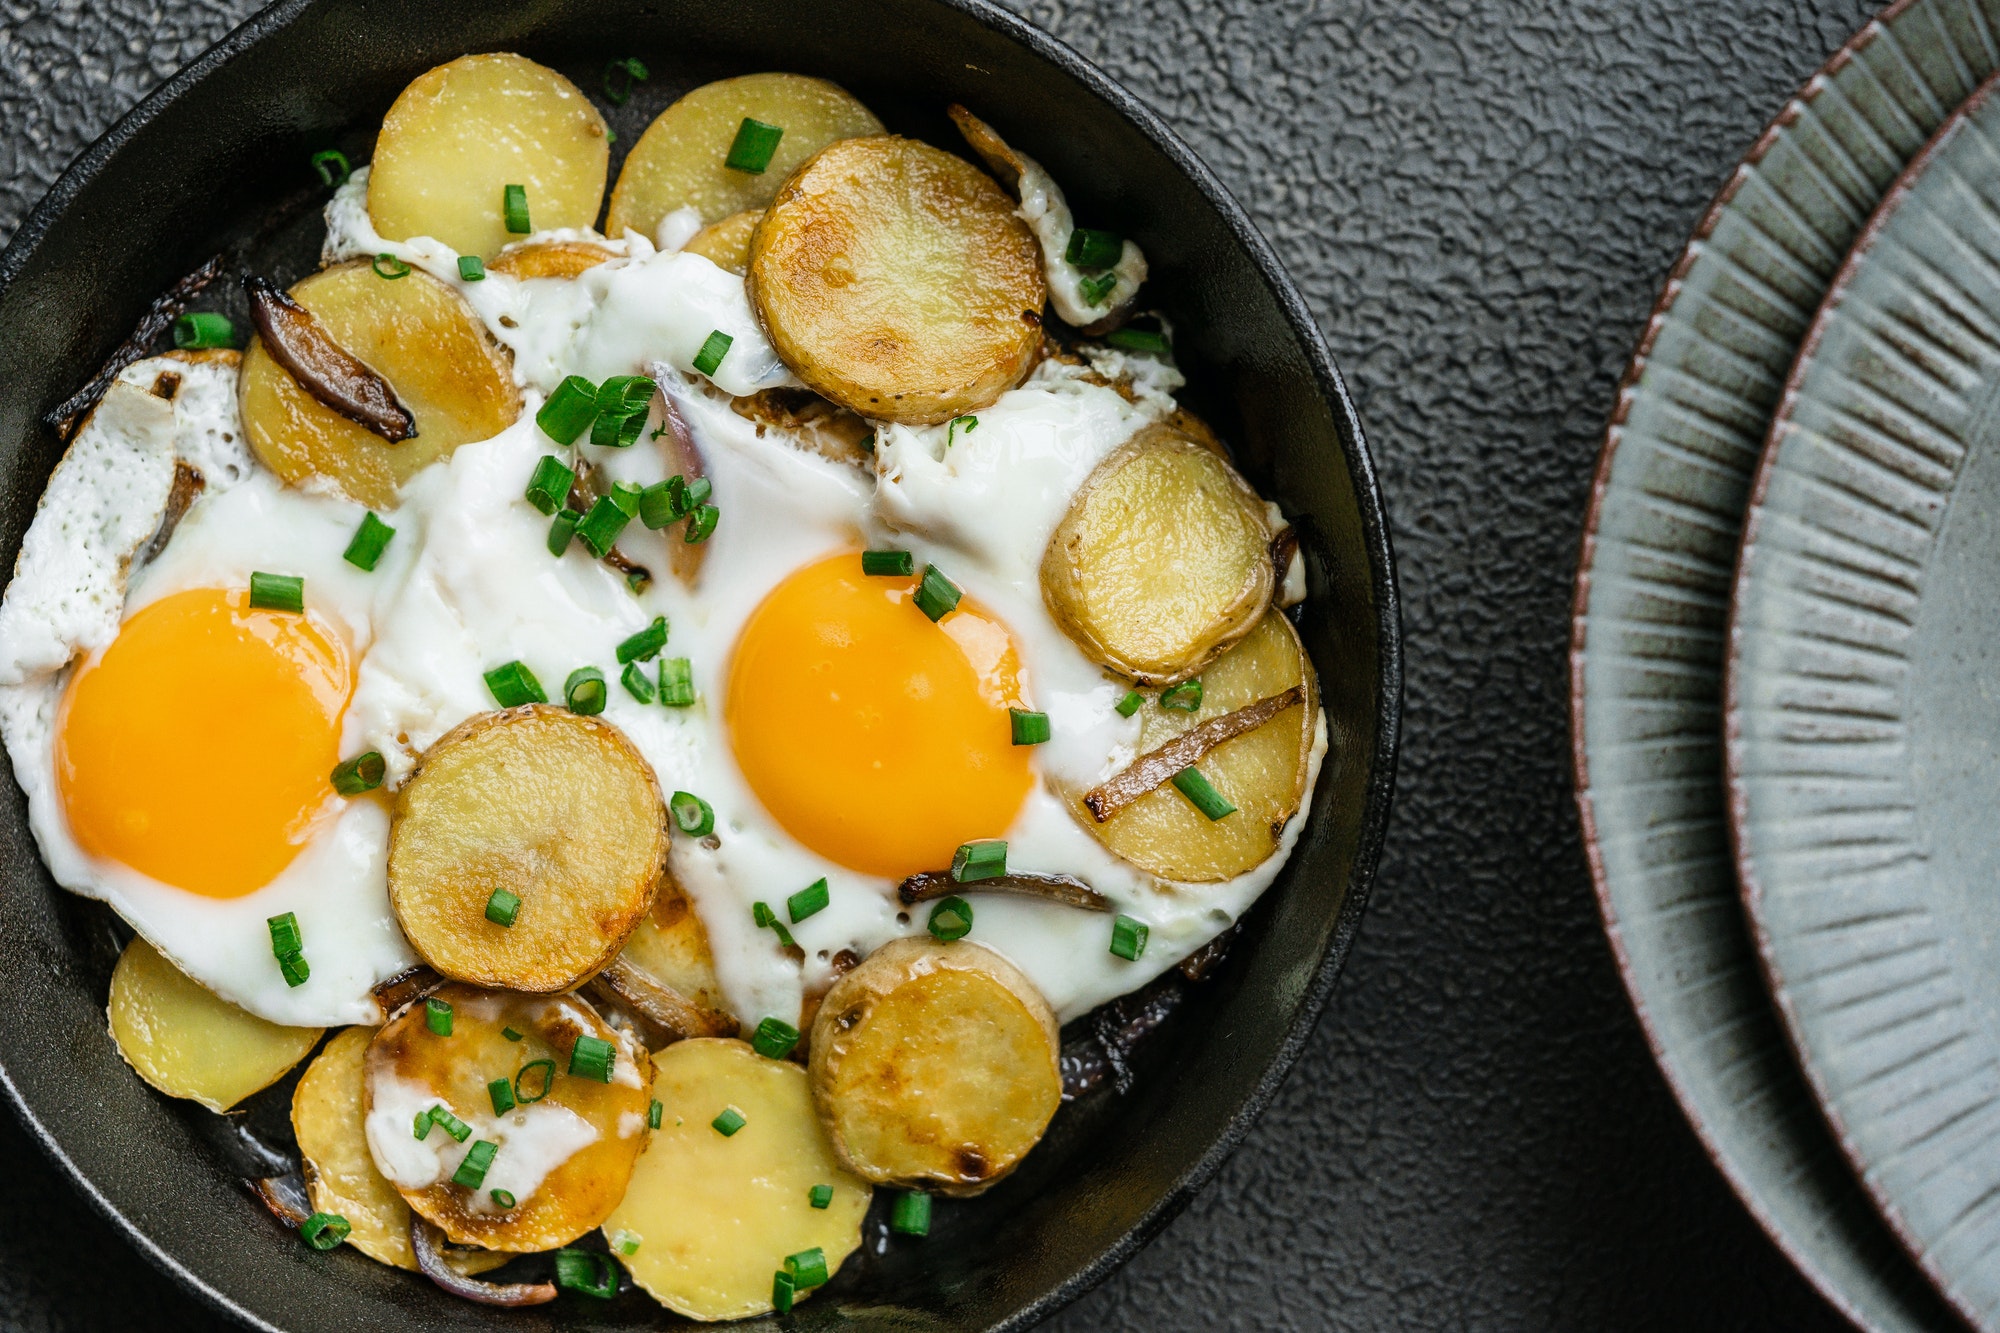 Fried eggs with potatoes